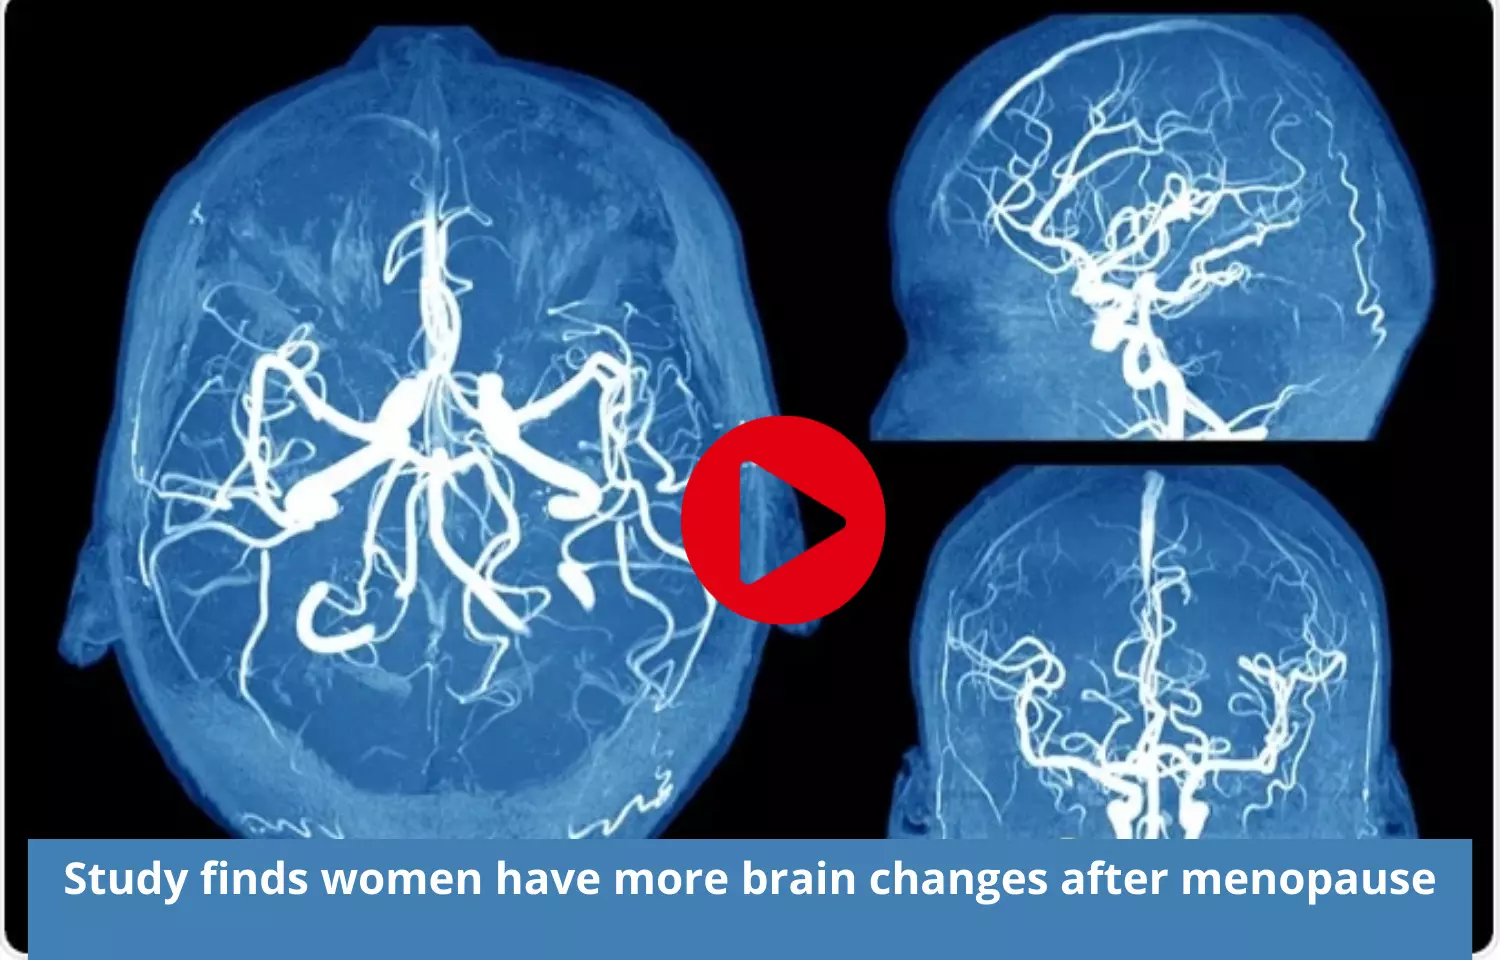 Women to have more brain changes after menopause